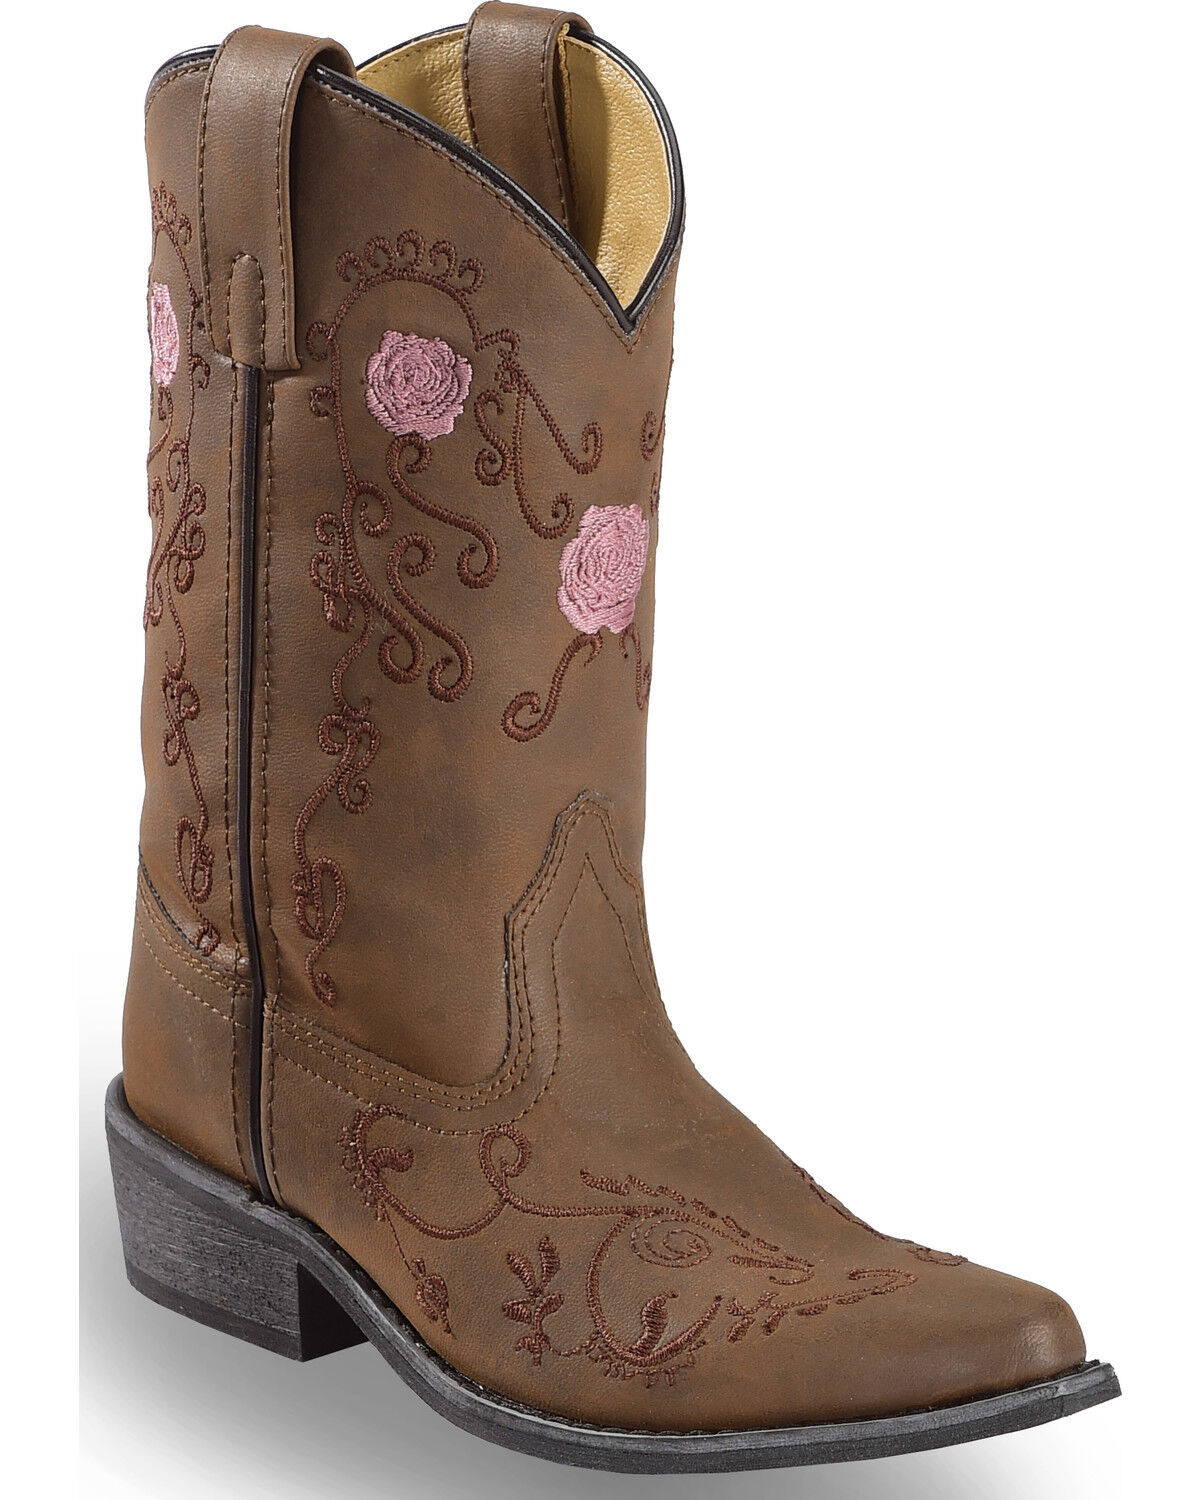 youth cowboy boots canada